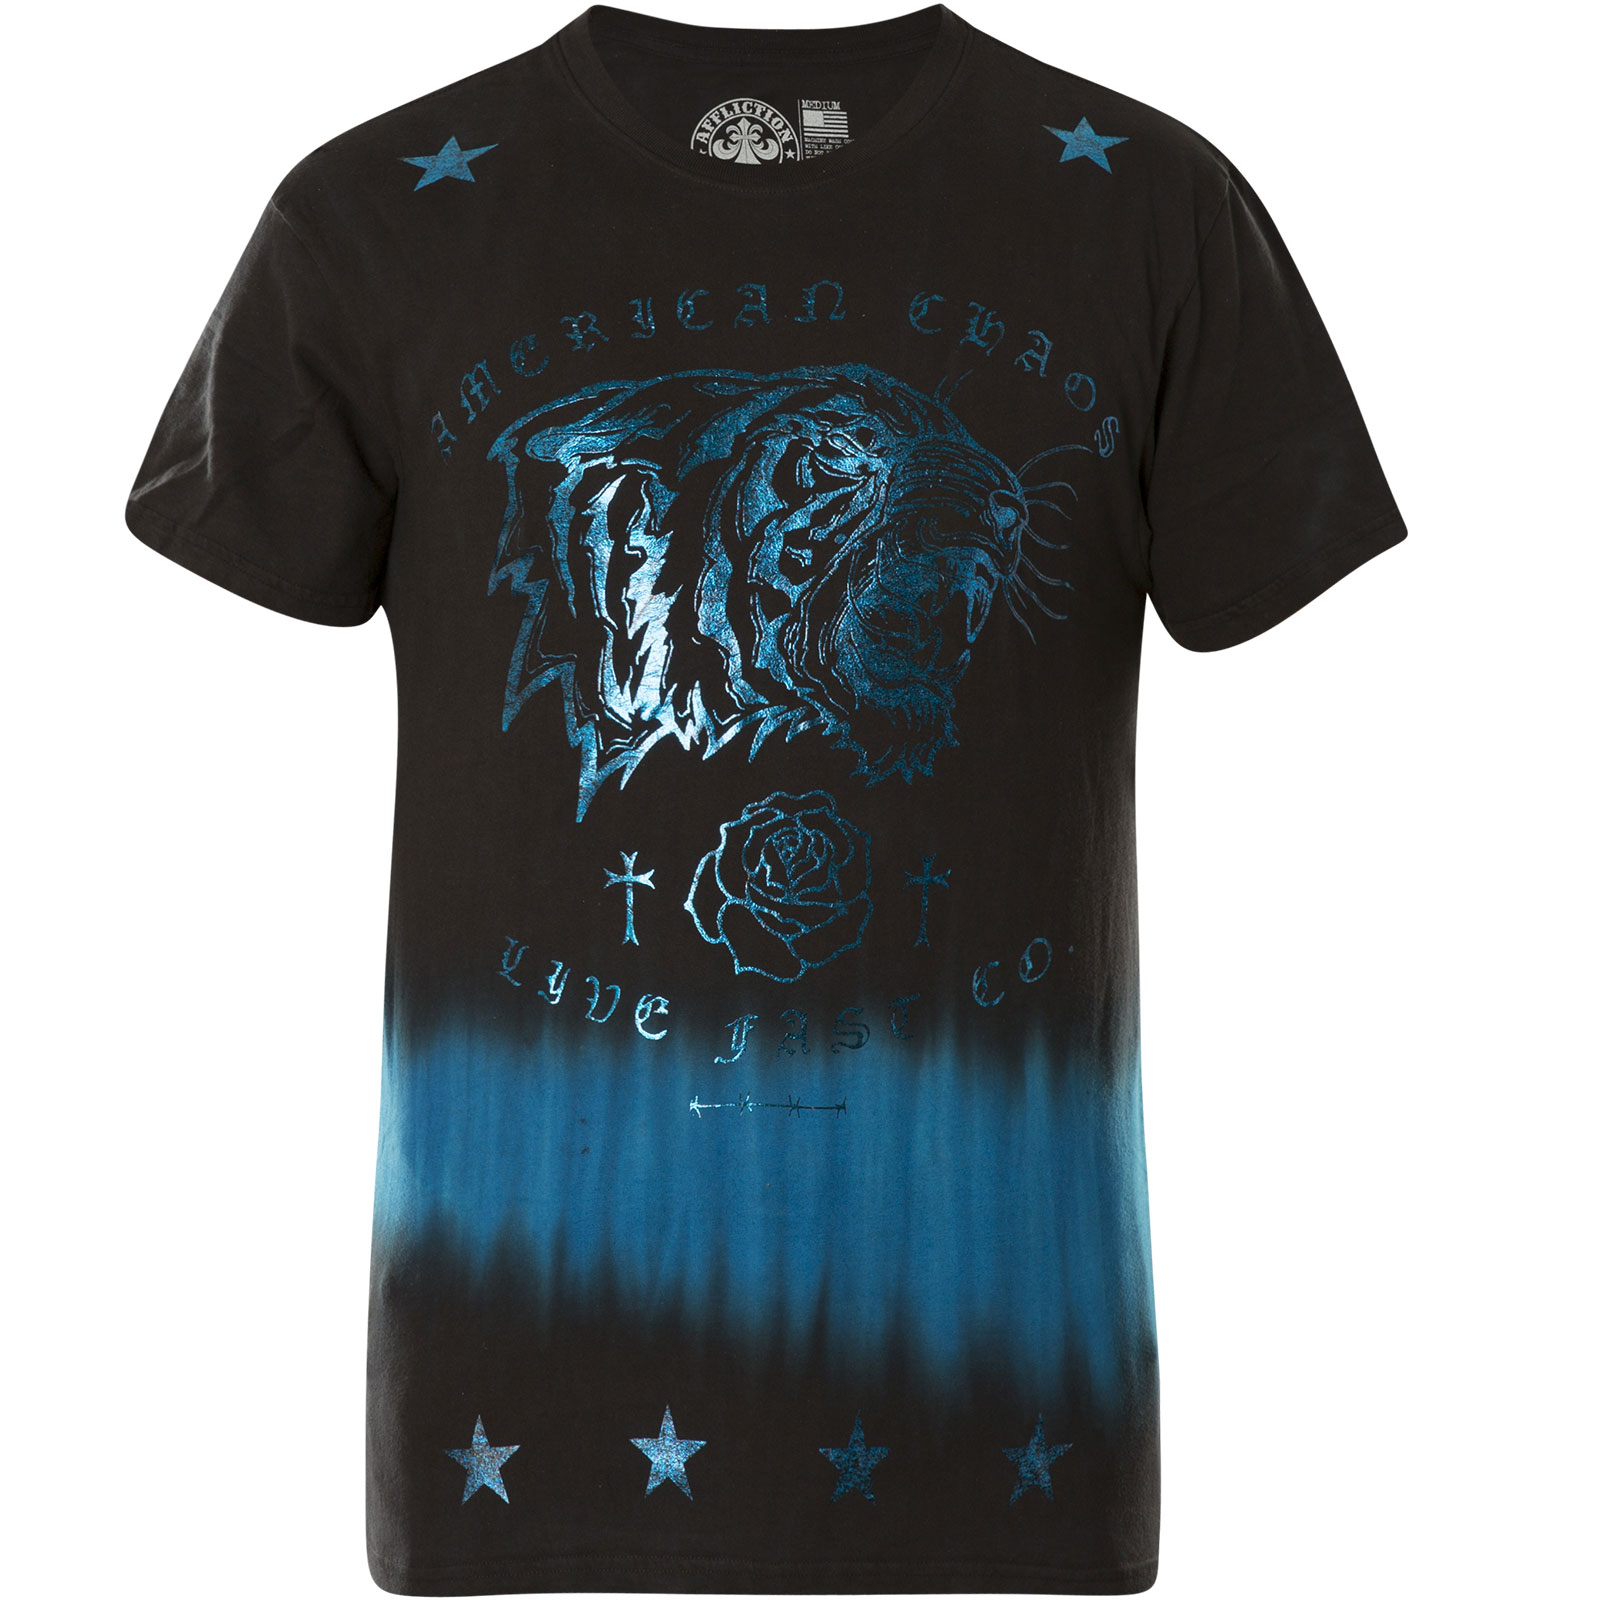 Affliction Tiger Blood T-Shirt featuring a tiger's head